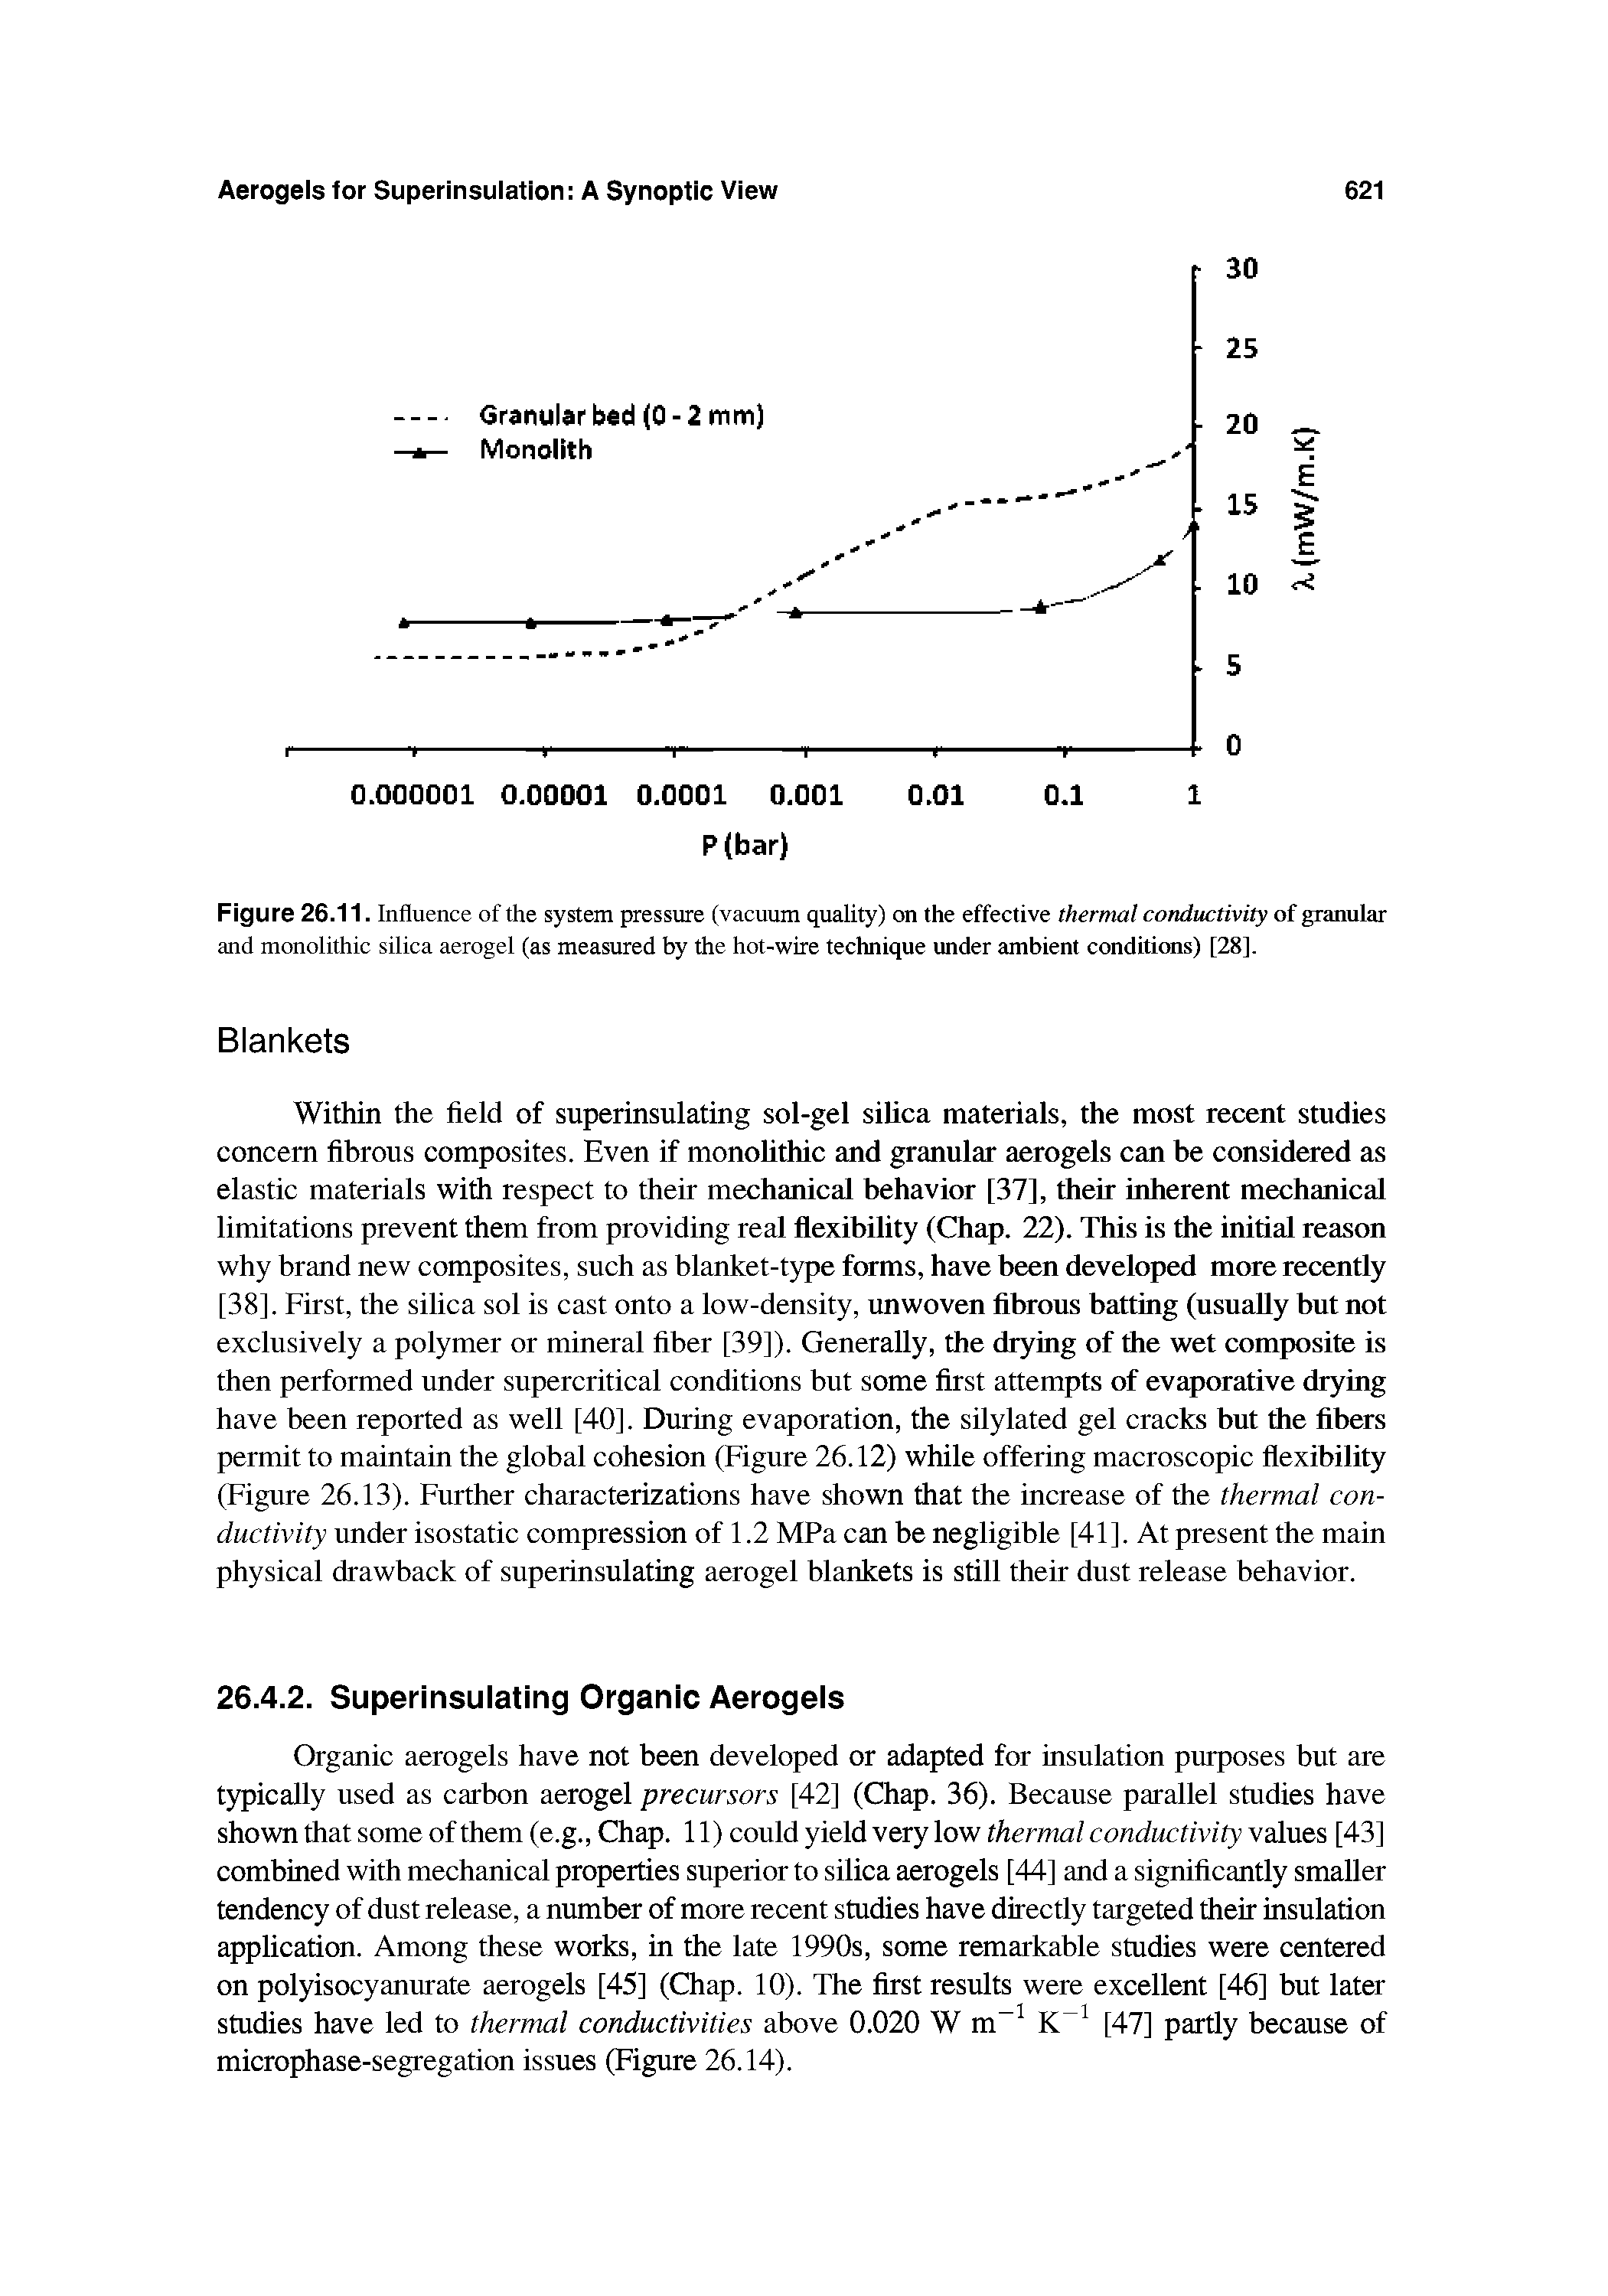 Figure 26.11. Influence of the system pressure (vacuum quality) on the effective thermal conductivity of granular and monolithic silica aerogel (as measured by the hot-wire technique under ambient conditions) [28].